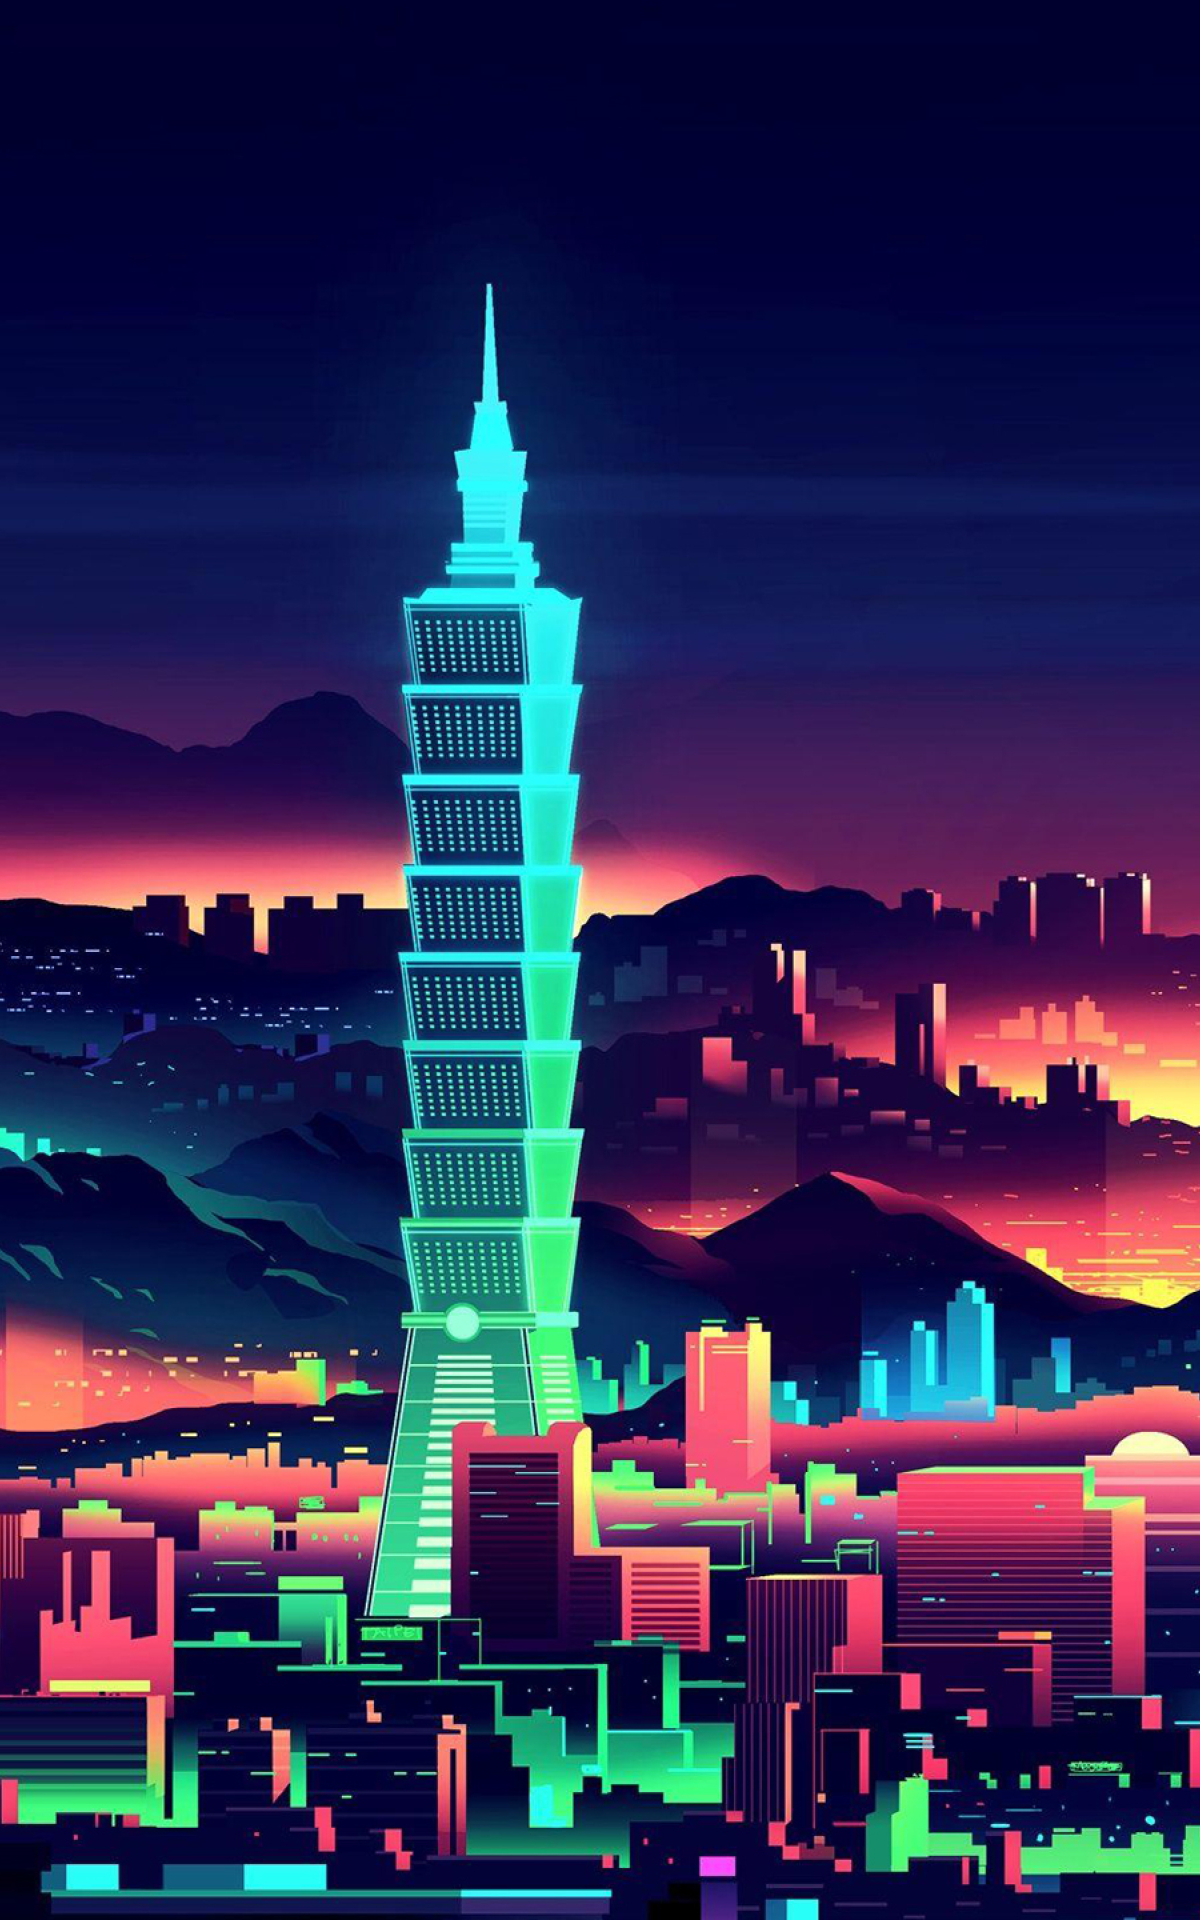 10x19 Vaporwave City Night 10x19 Resolution Wallpaper Hd Artist 4k Wallpapers Images Photos And Background Wallpapers Den